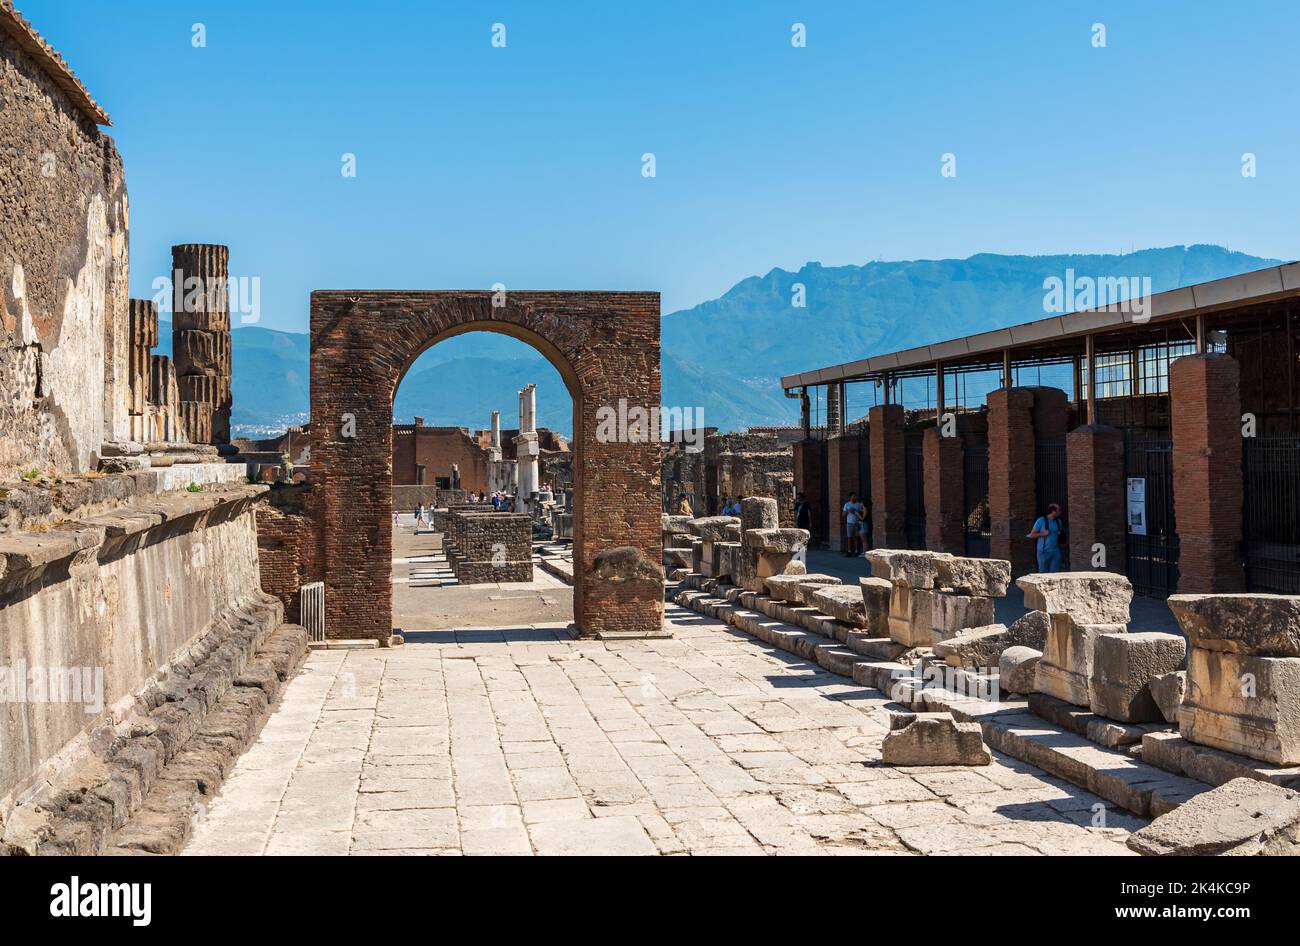 Building structures in ruins in the ancient city of Pompei Stock Photo